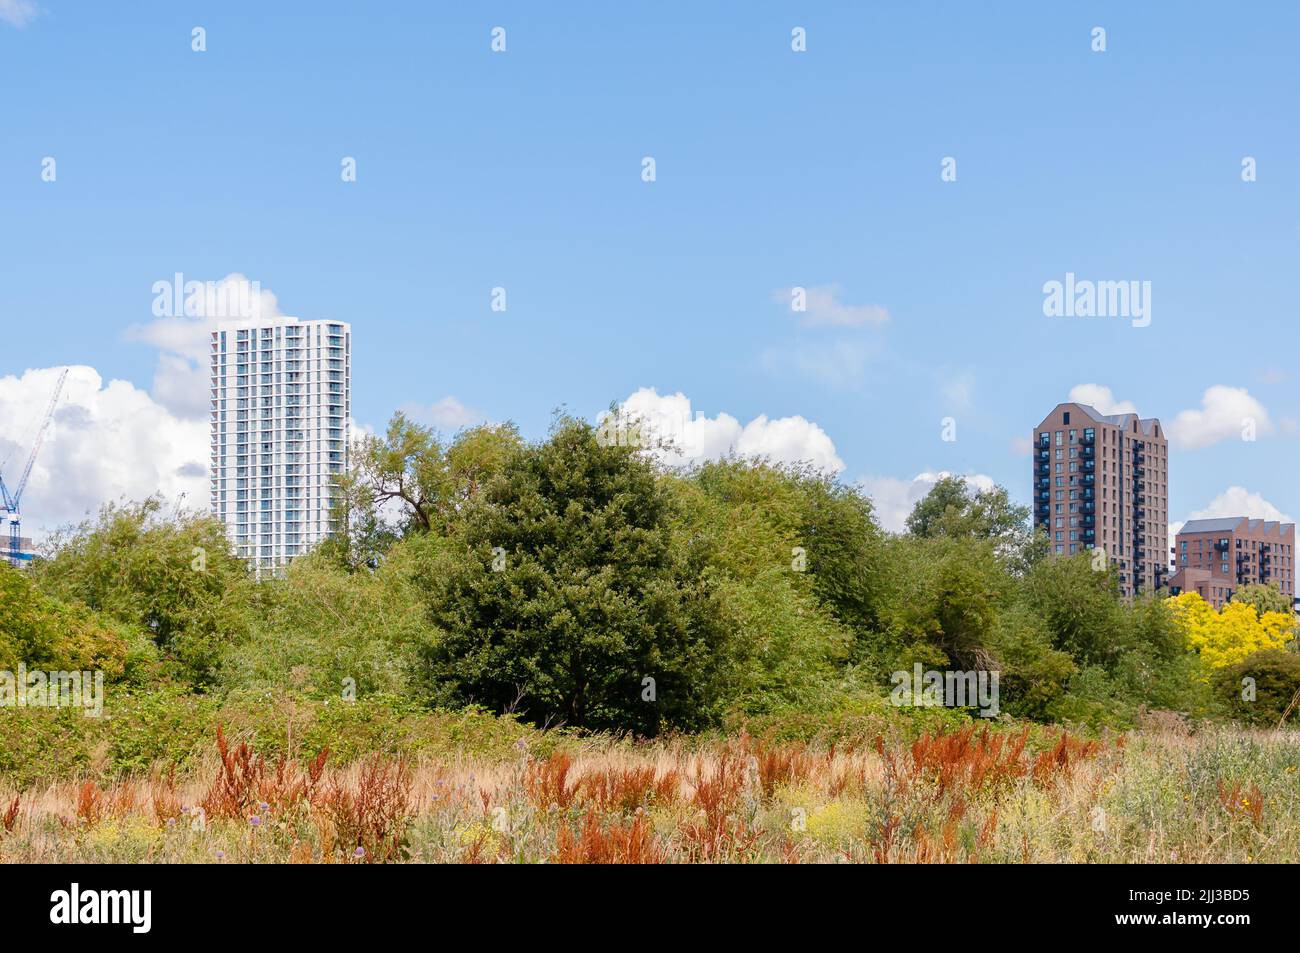 Apartment buildings on the edge of Walthamstow Wetlands, London Stock Photo  - Alamy